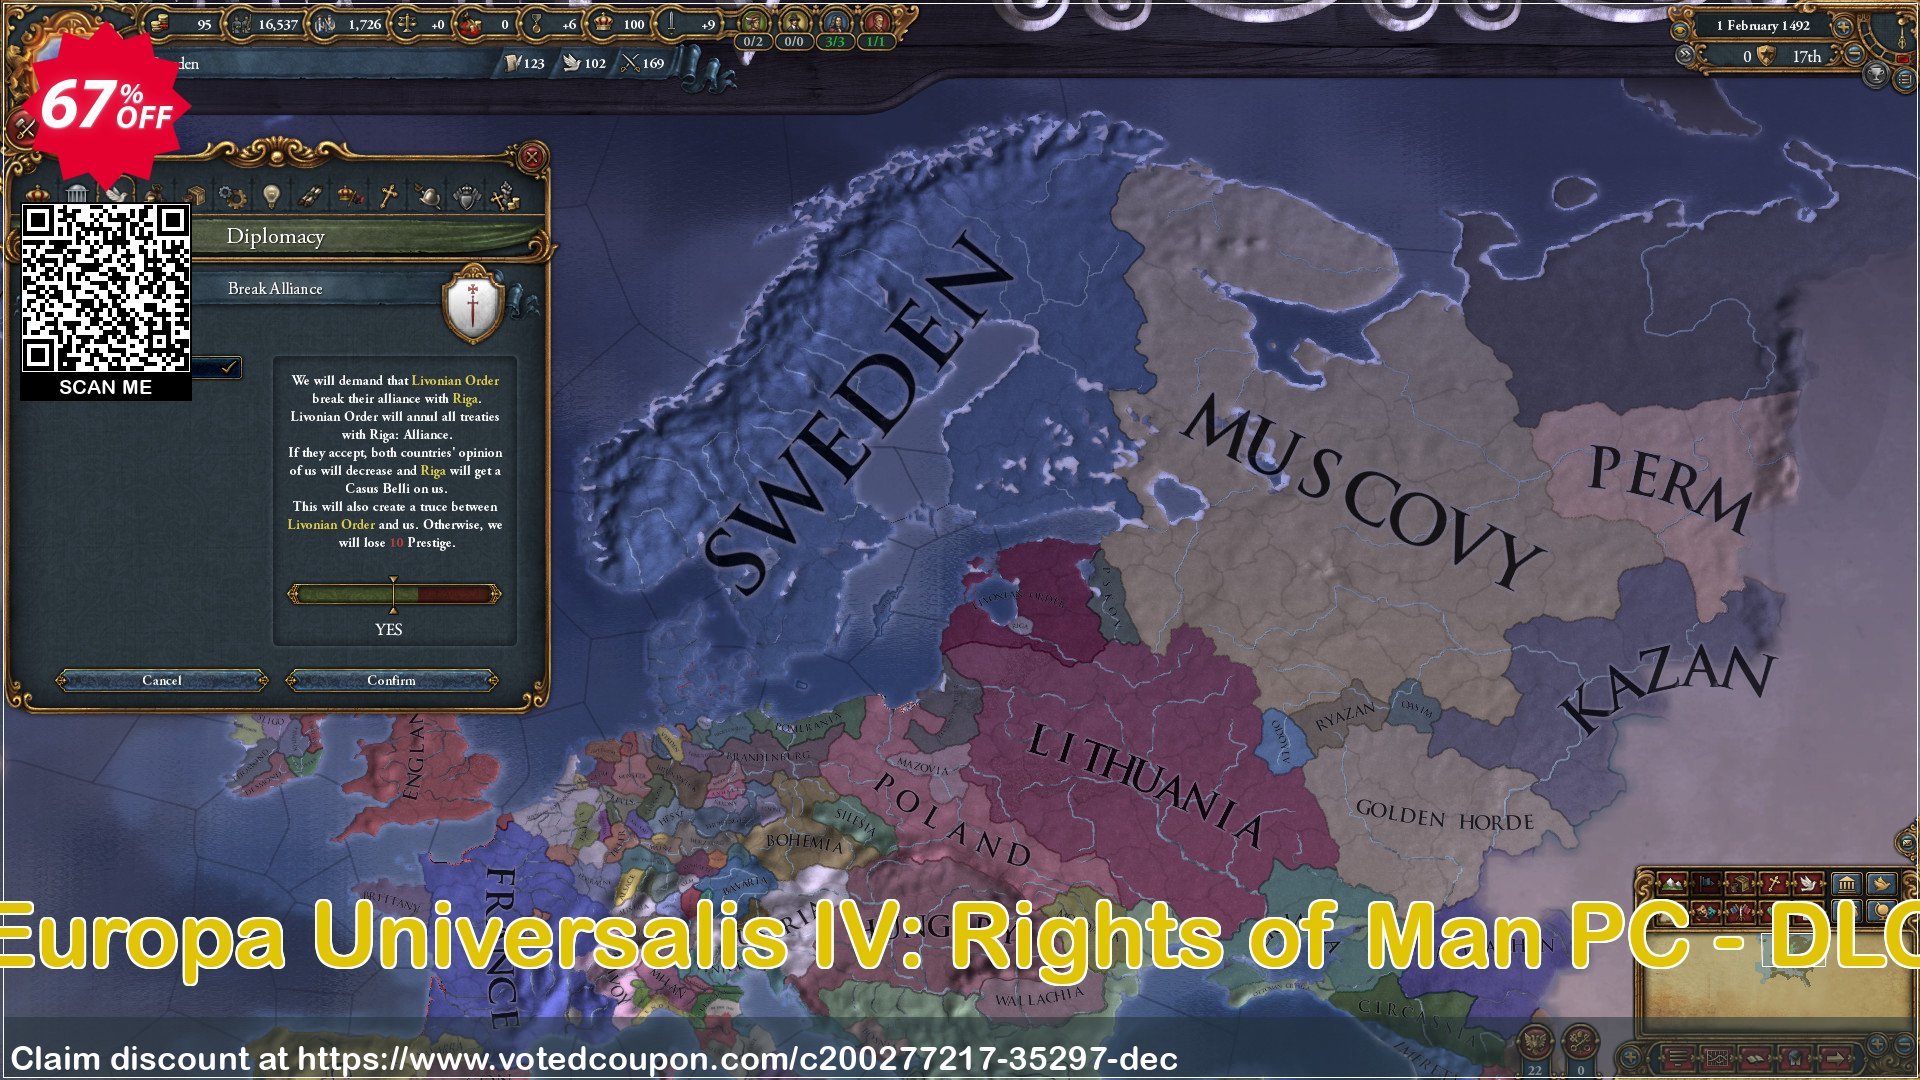 Europa Universalis IV: Rights of Man PC - DLC Coupon Code Apr 2024, 67% OFF - VotedCoupon